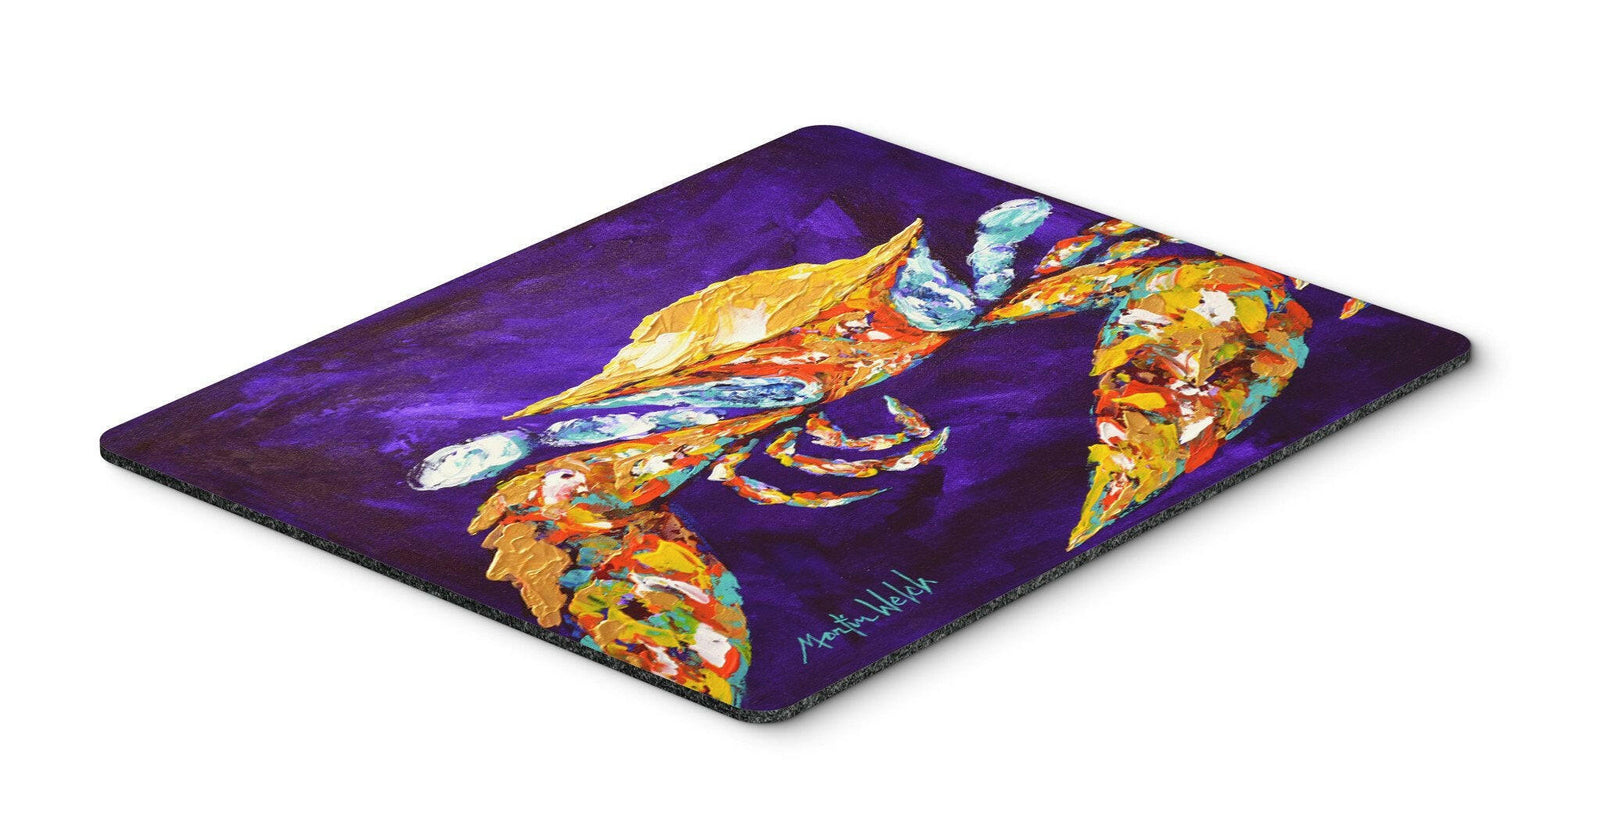 The Right Stuff Crab in Purple Mouse Pad, Hot Pad or Trivet MW1172MP by Caroline's Treasures